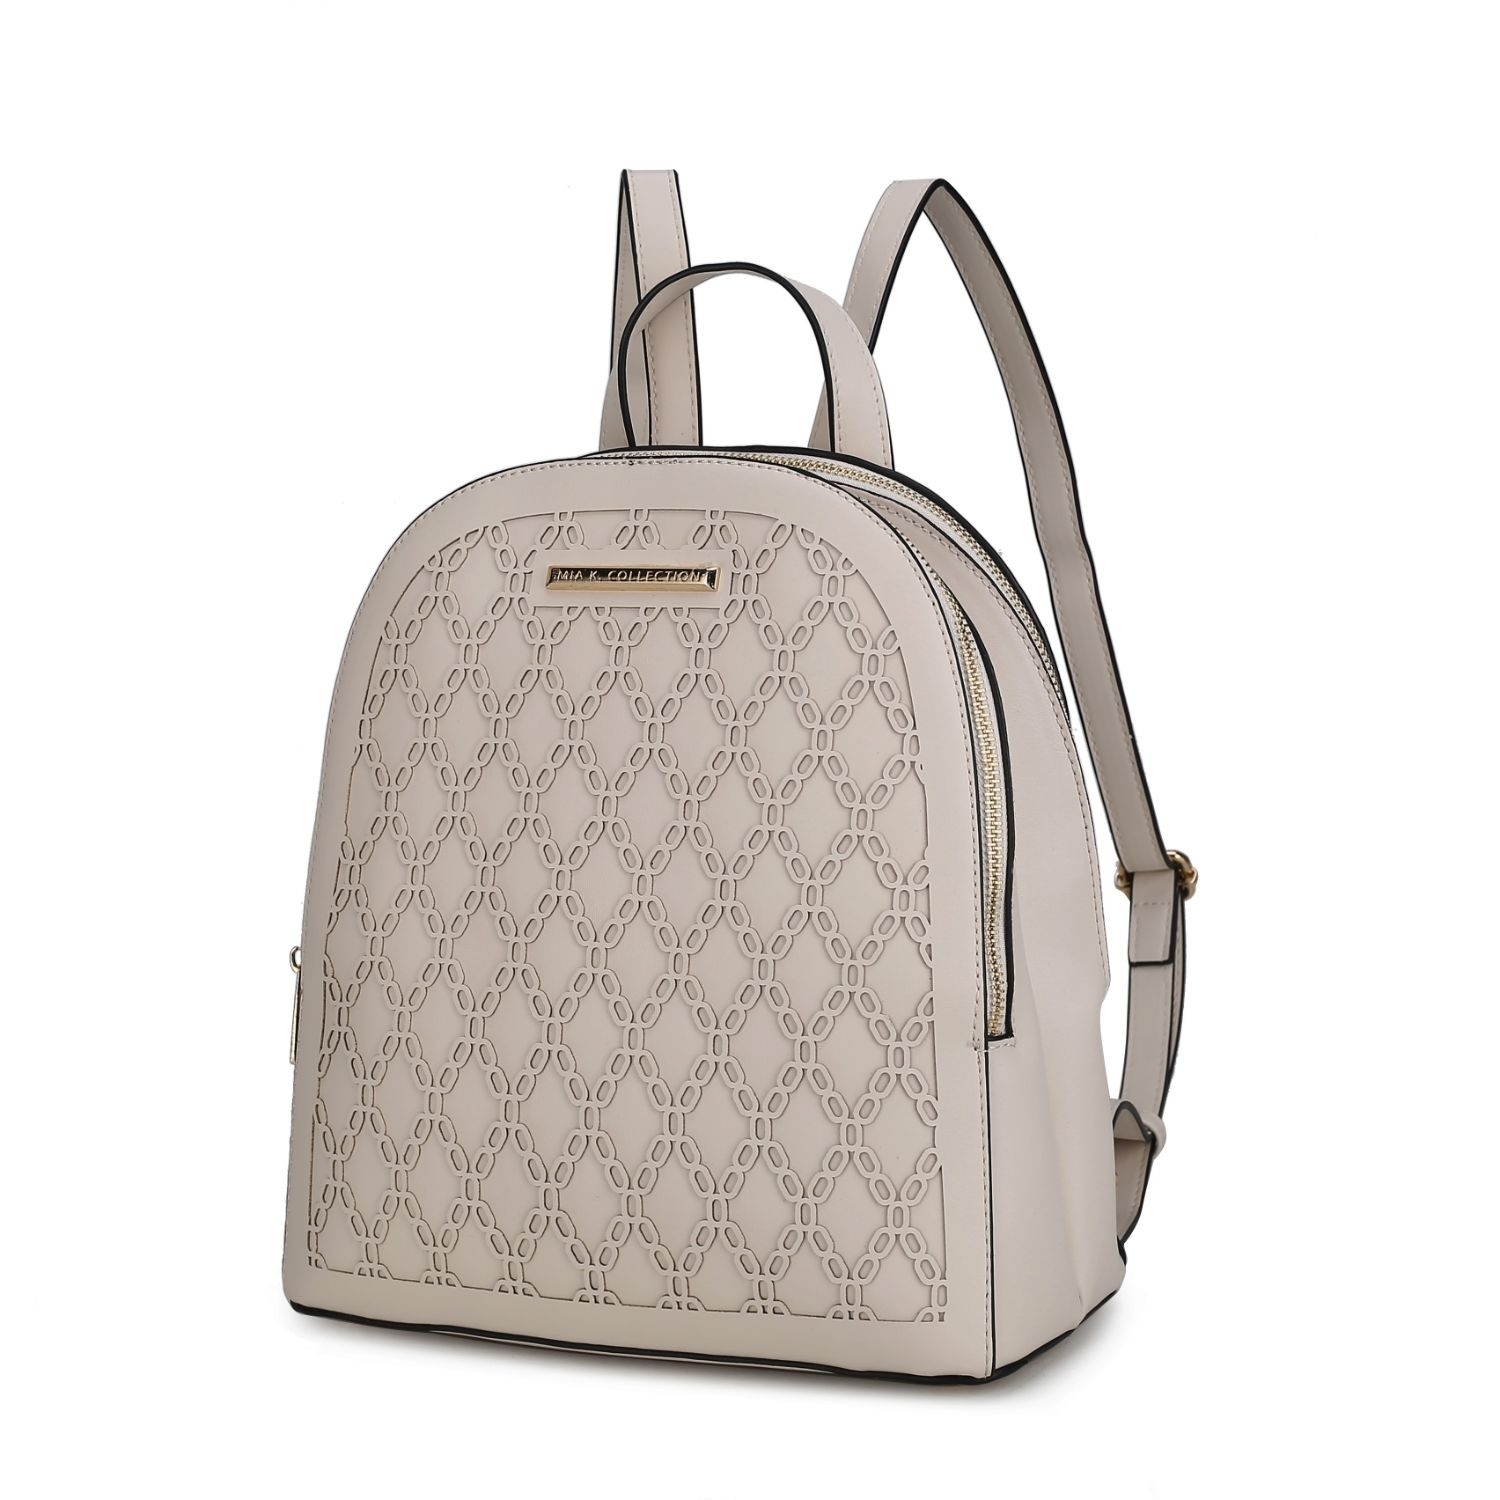 MKF Collection Sloane Vegan Leather Multi Compartment Backpack By Mia K. - Beige